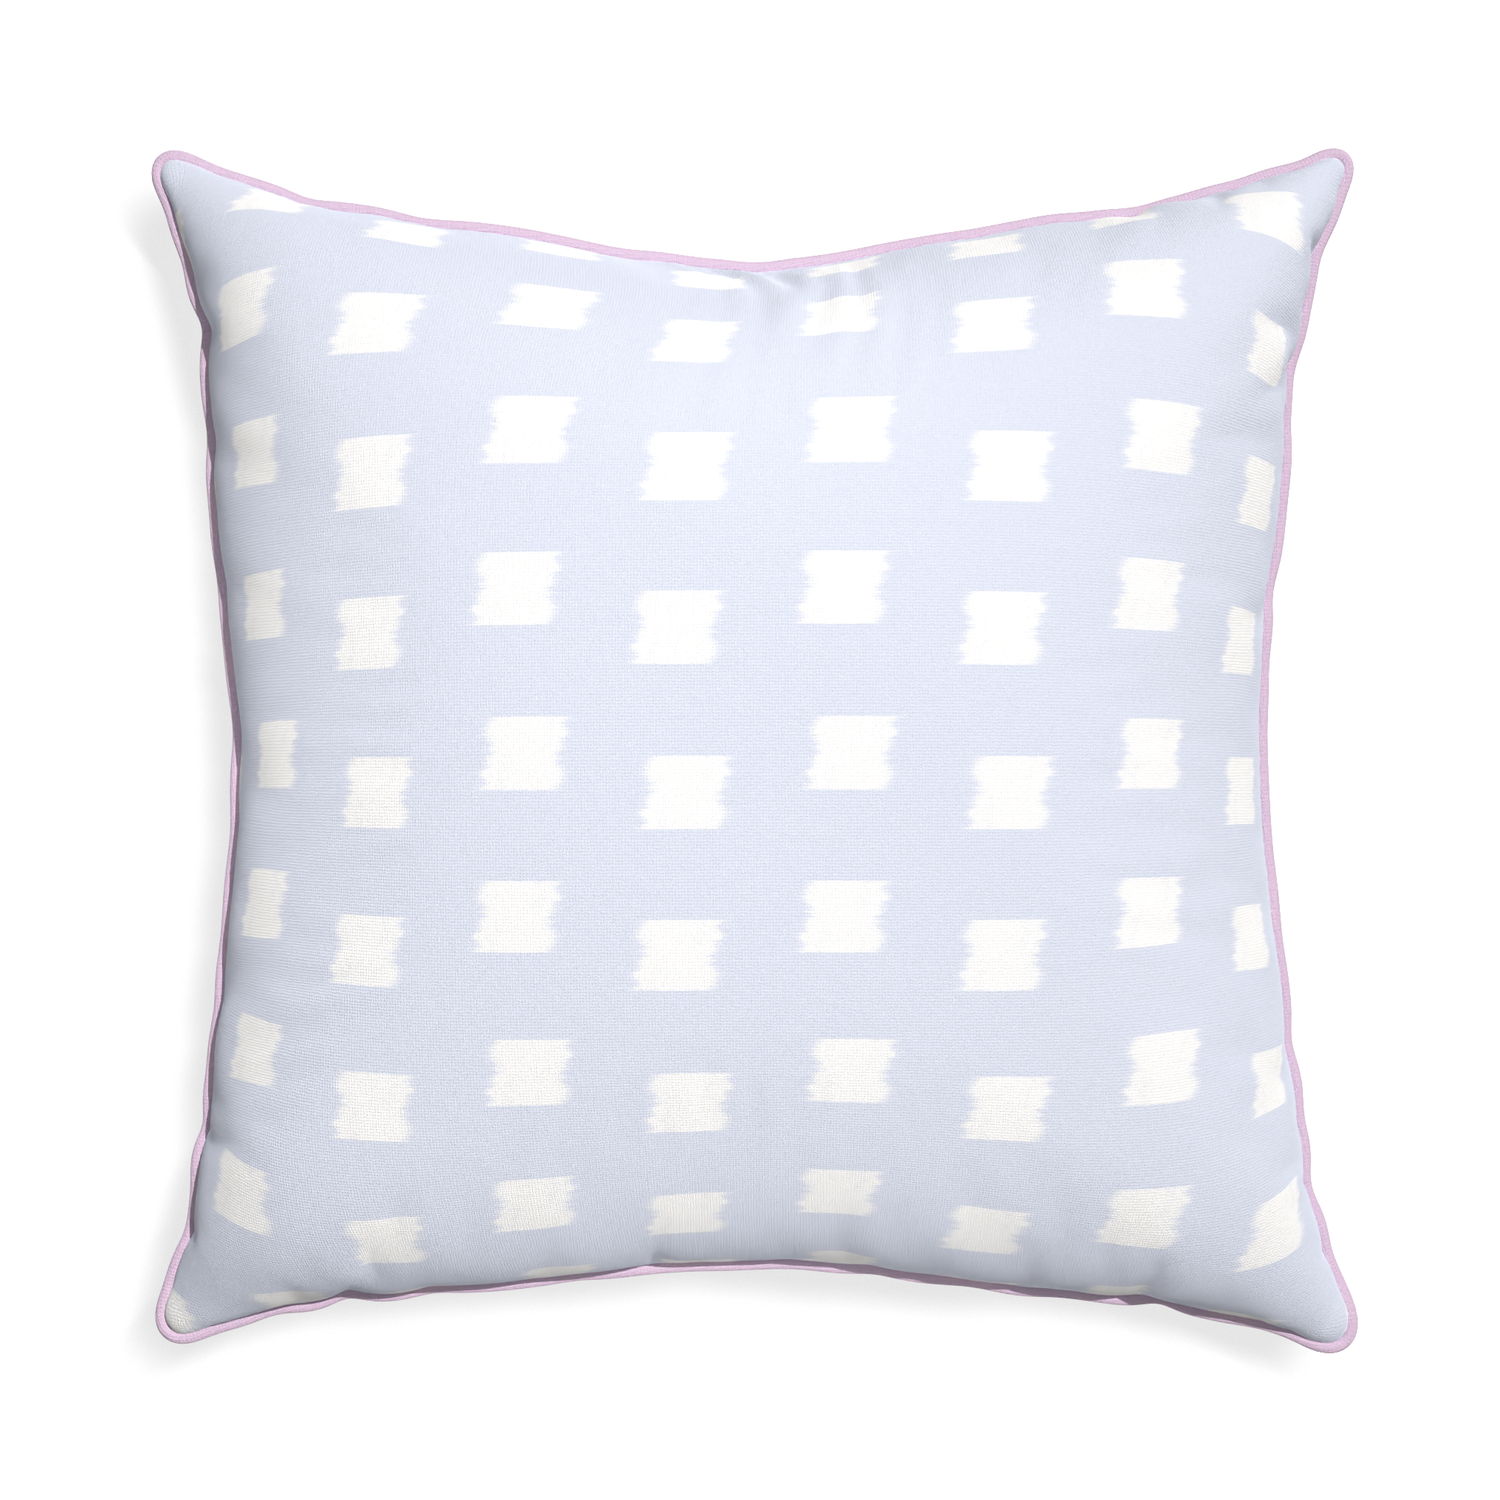 Euro-sham denton custom sky blue patternpillow with l piping on white background